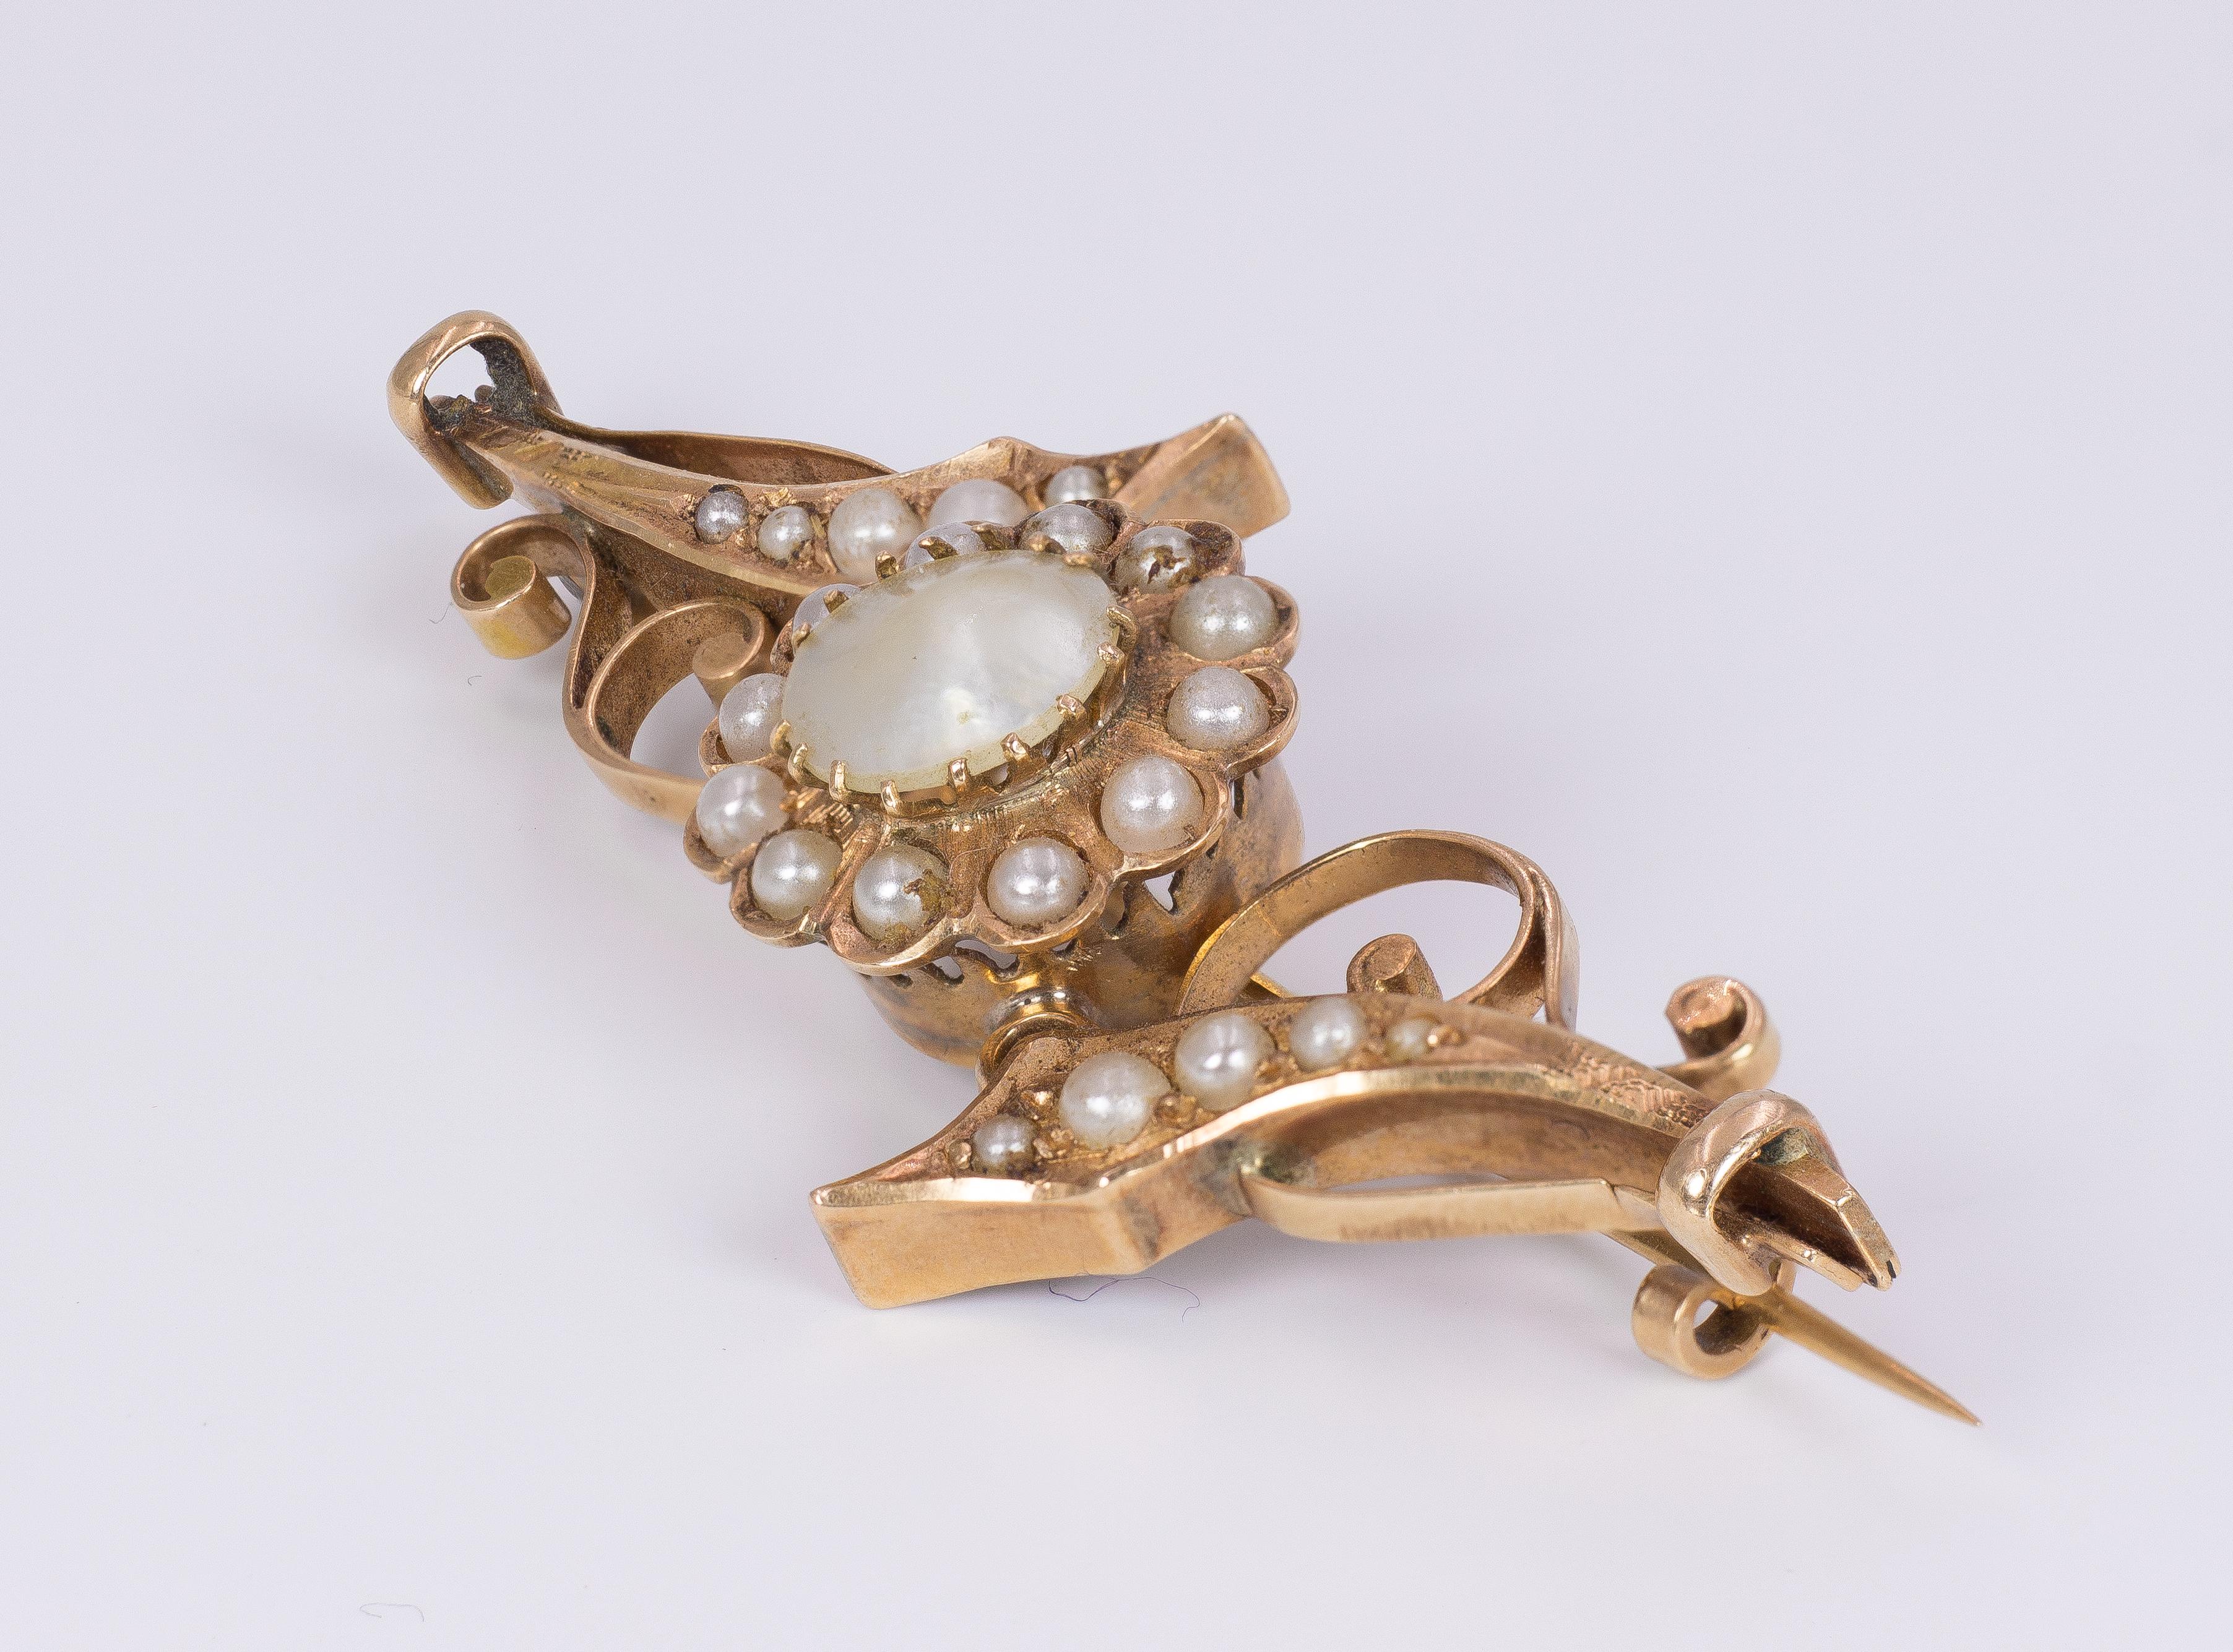 This antique brooch, dating from the House of Bourbon period (the 2nd half/late Nineteenth Century) is set with a central flower, decorated with pearls; the flowe is flanked on either side by two other decorations, set with pearls. The brooch is